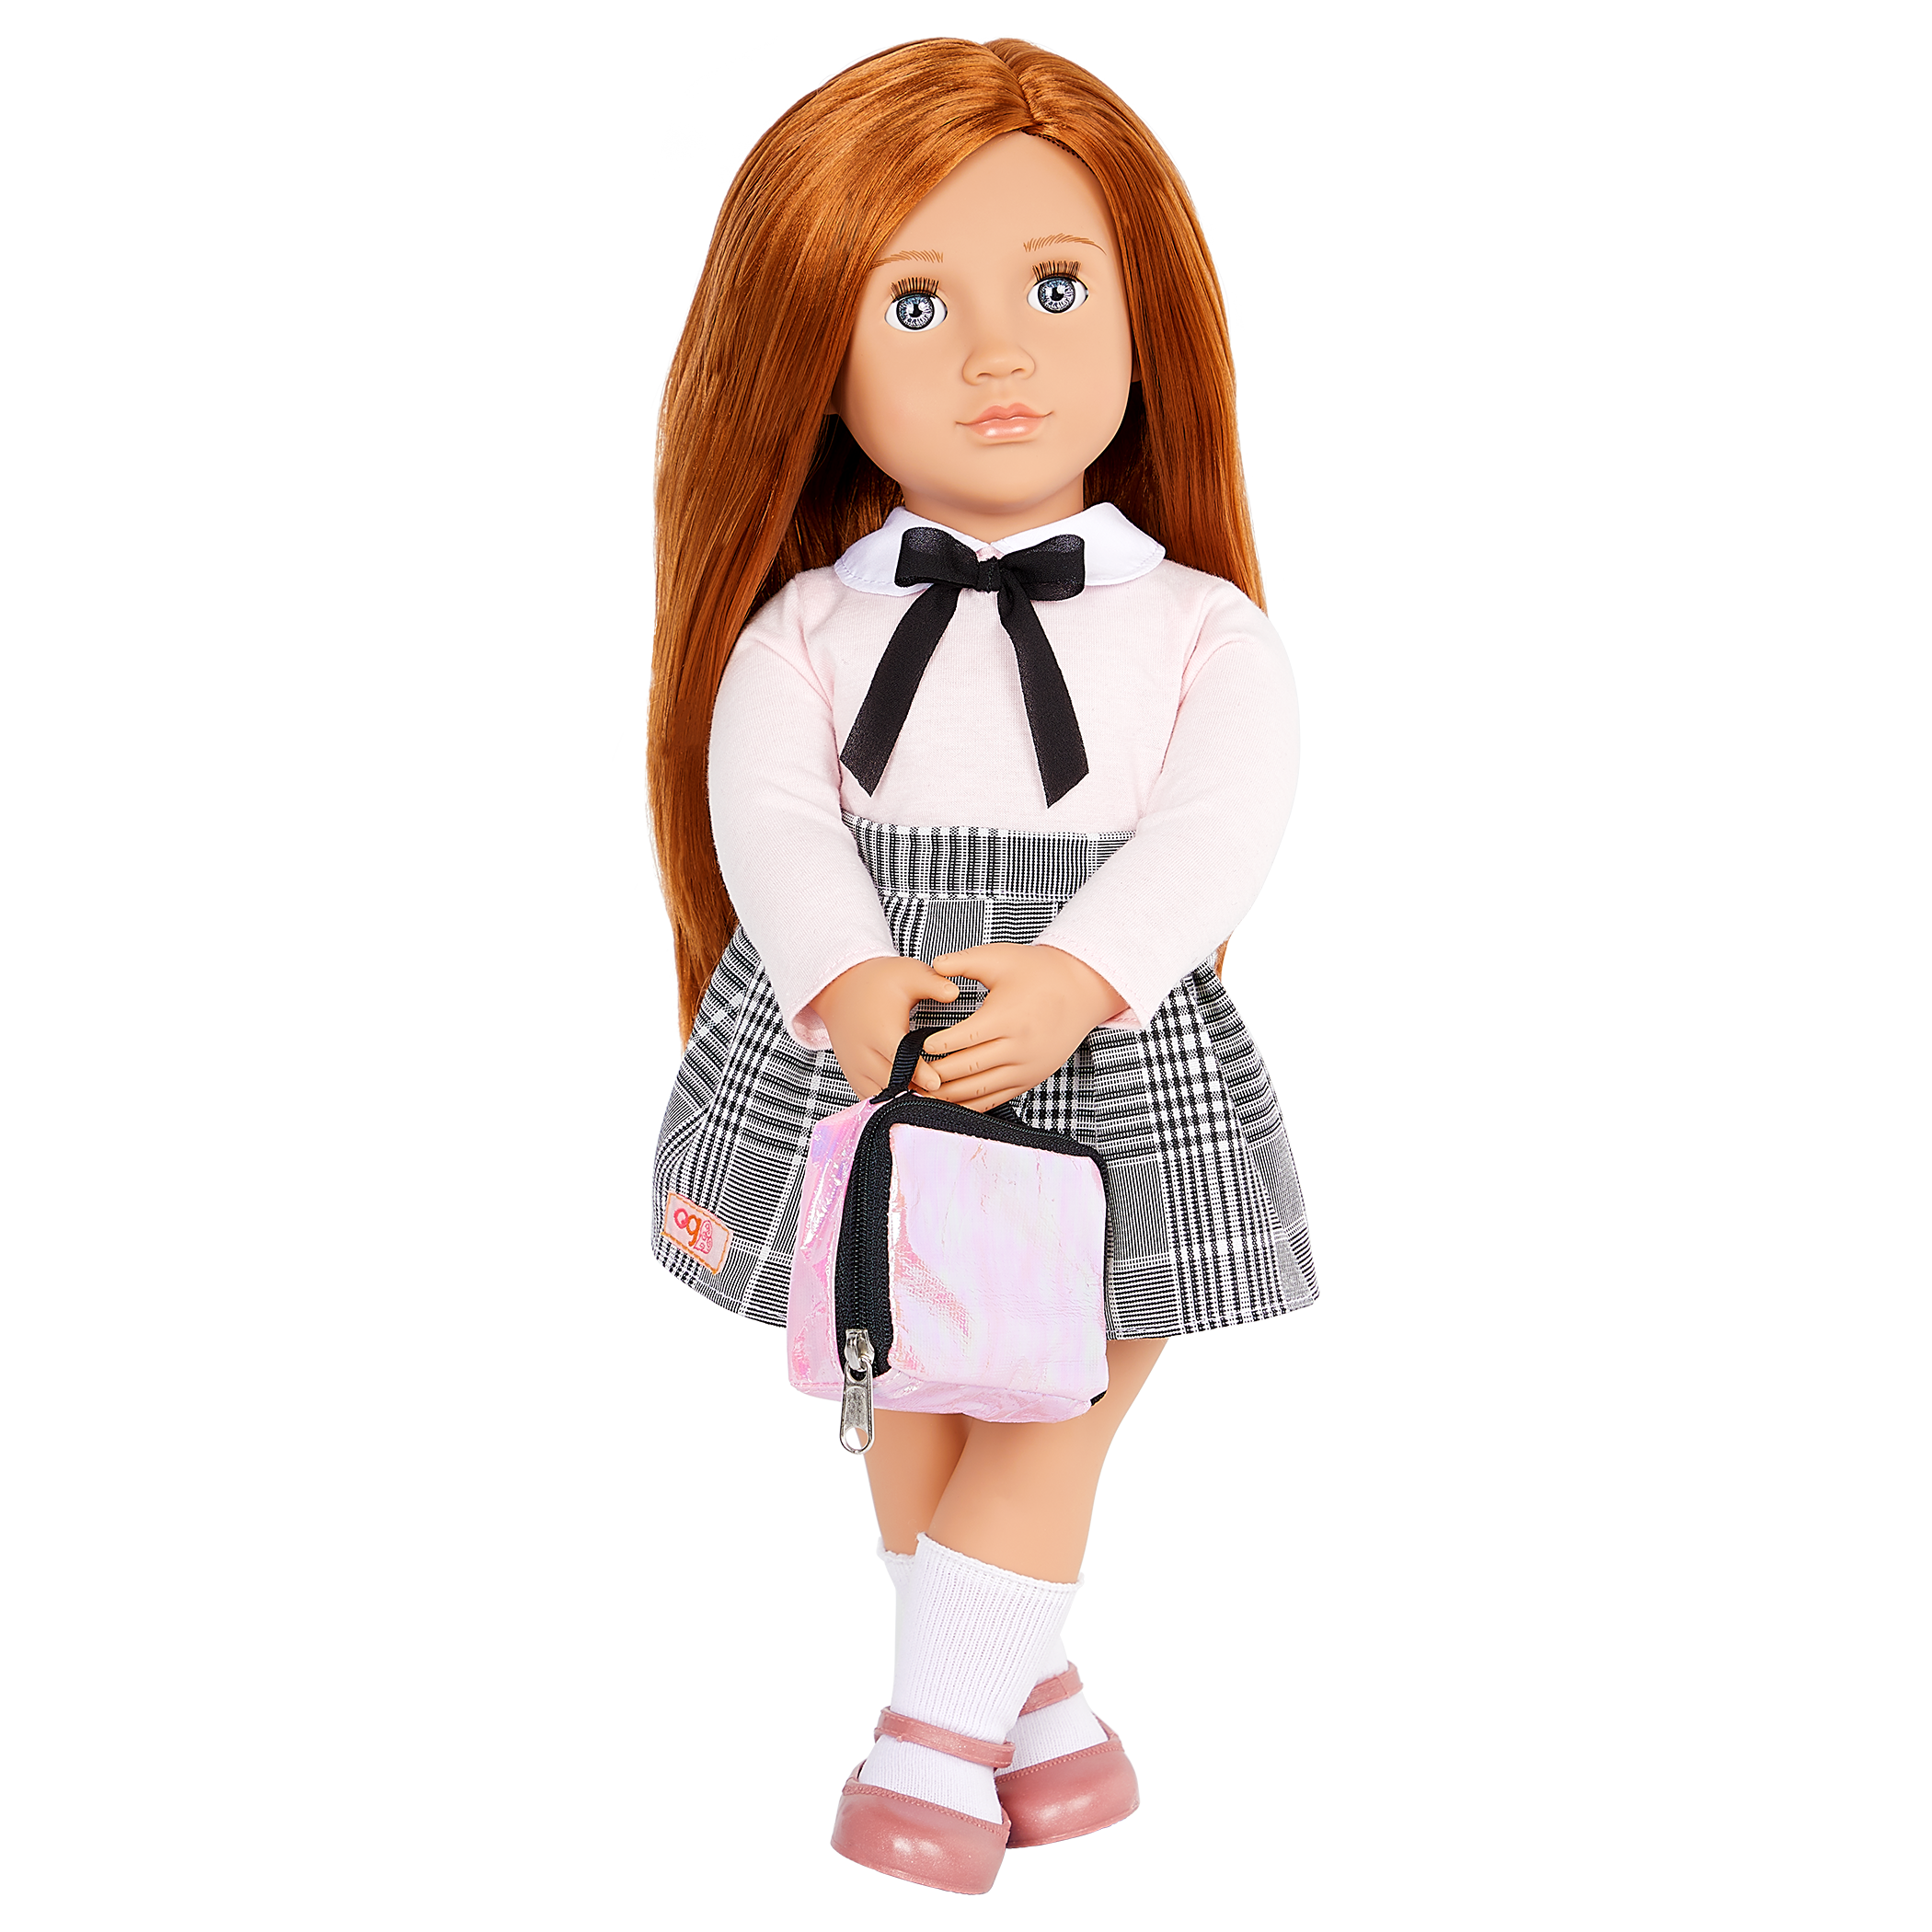 Our Generation 18-inch School Doll Carly